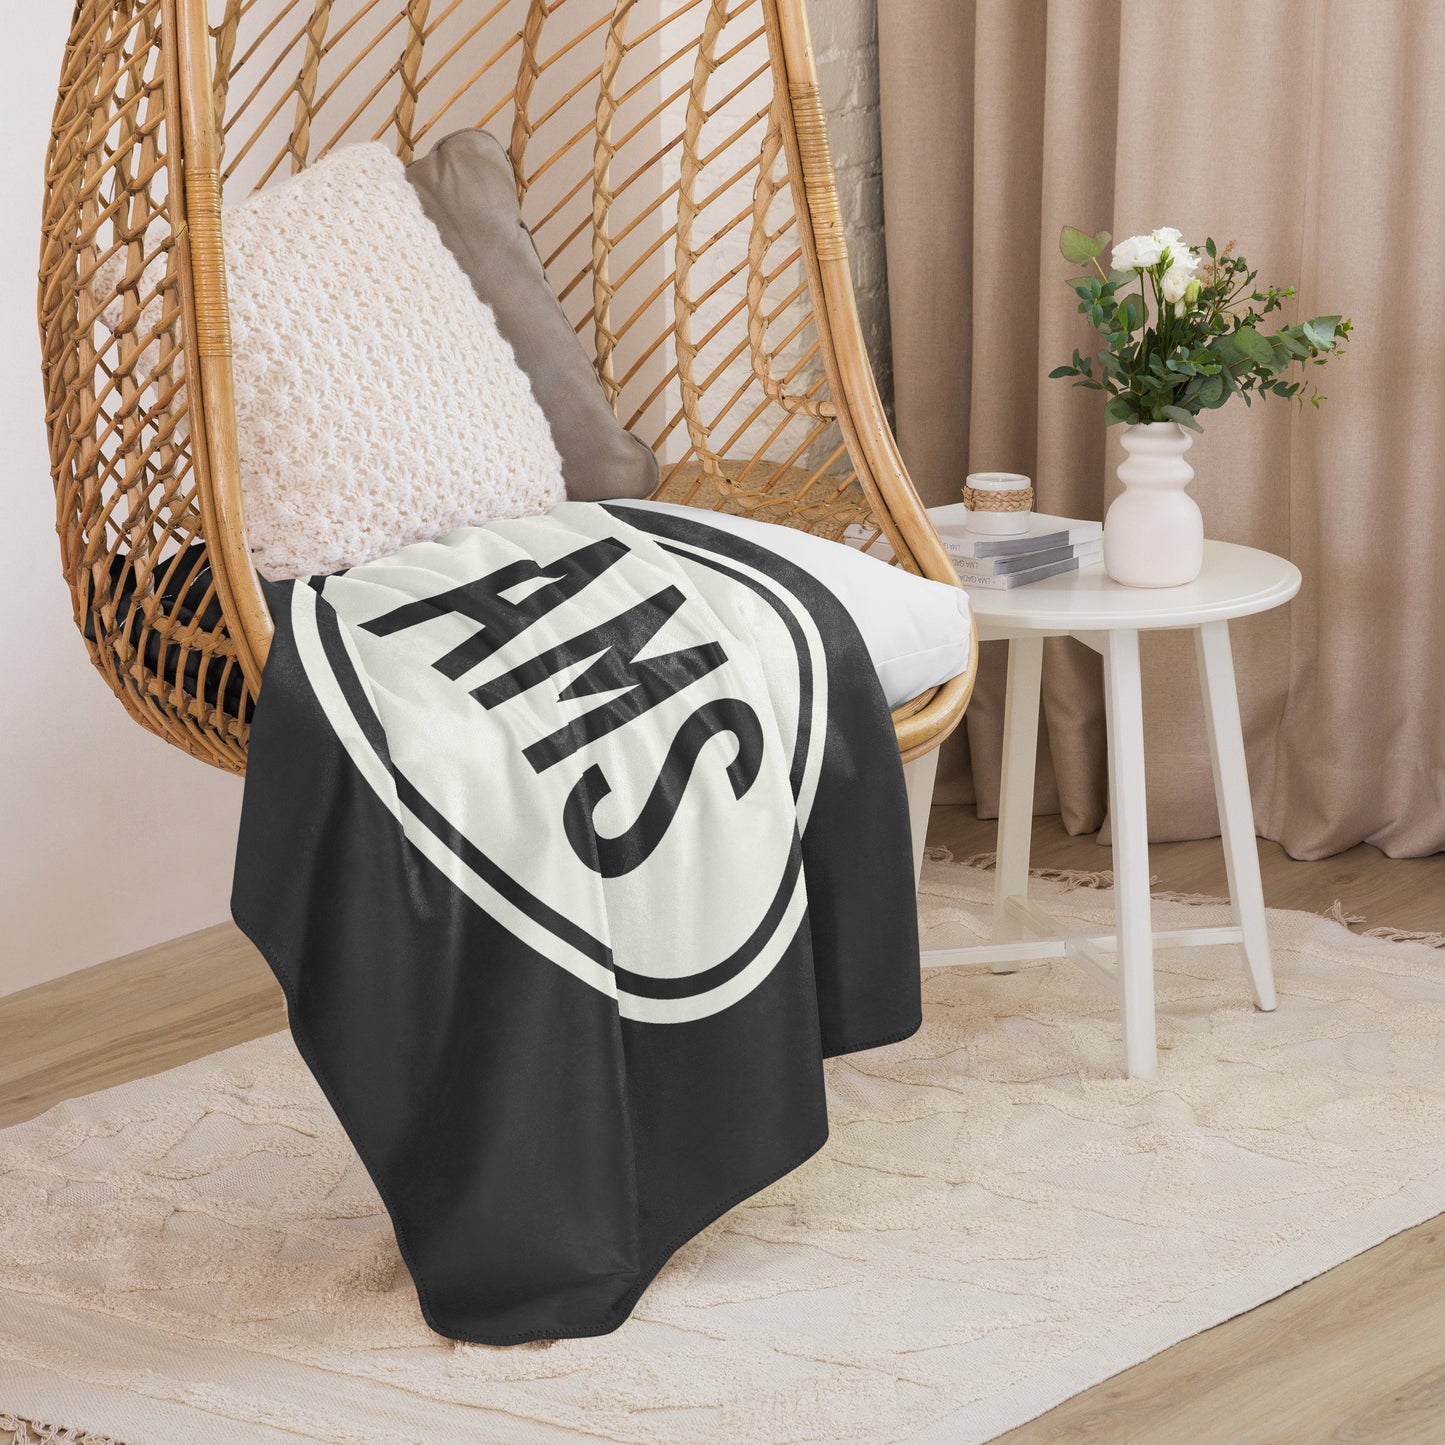 Unique Travel Gift Sherpa Blanket - White Oval • AMS Amsterdam • YHM Designs - Image 06